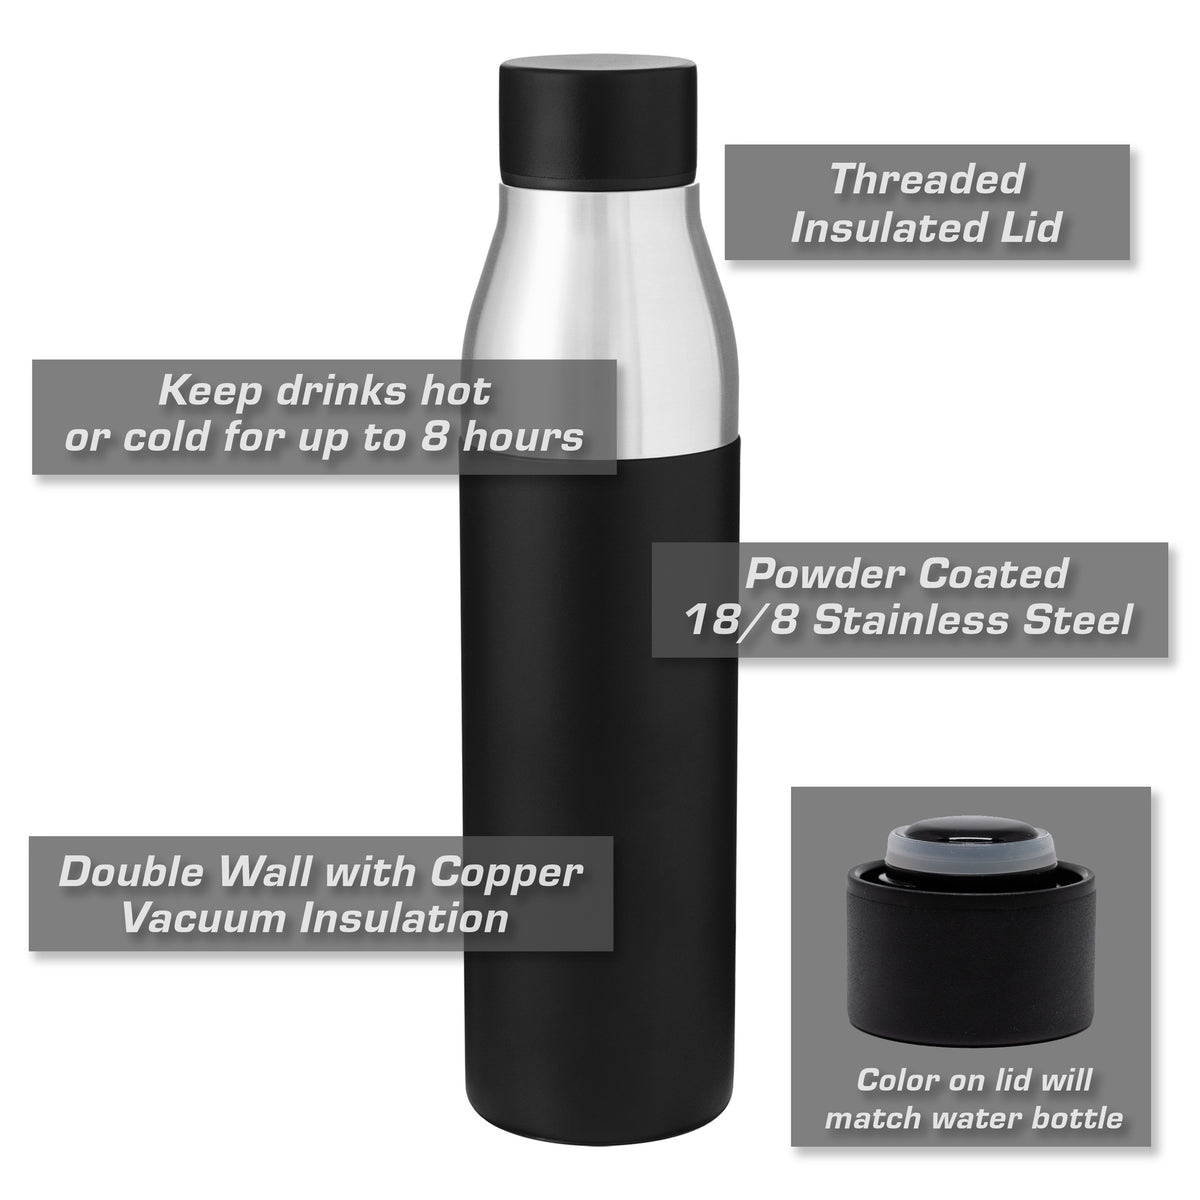 Ford Focus RS Insulated Stainless Steel Water Bottle - 21 oz